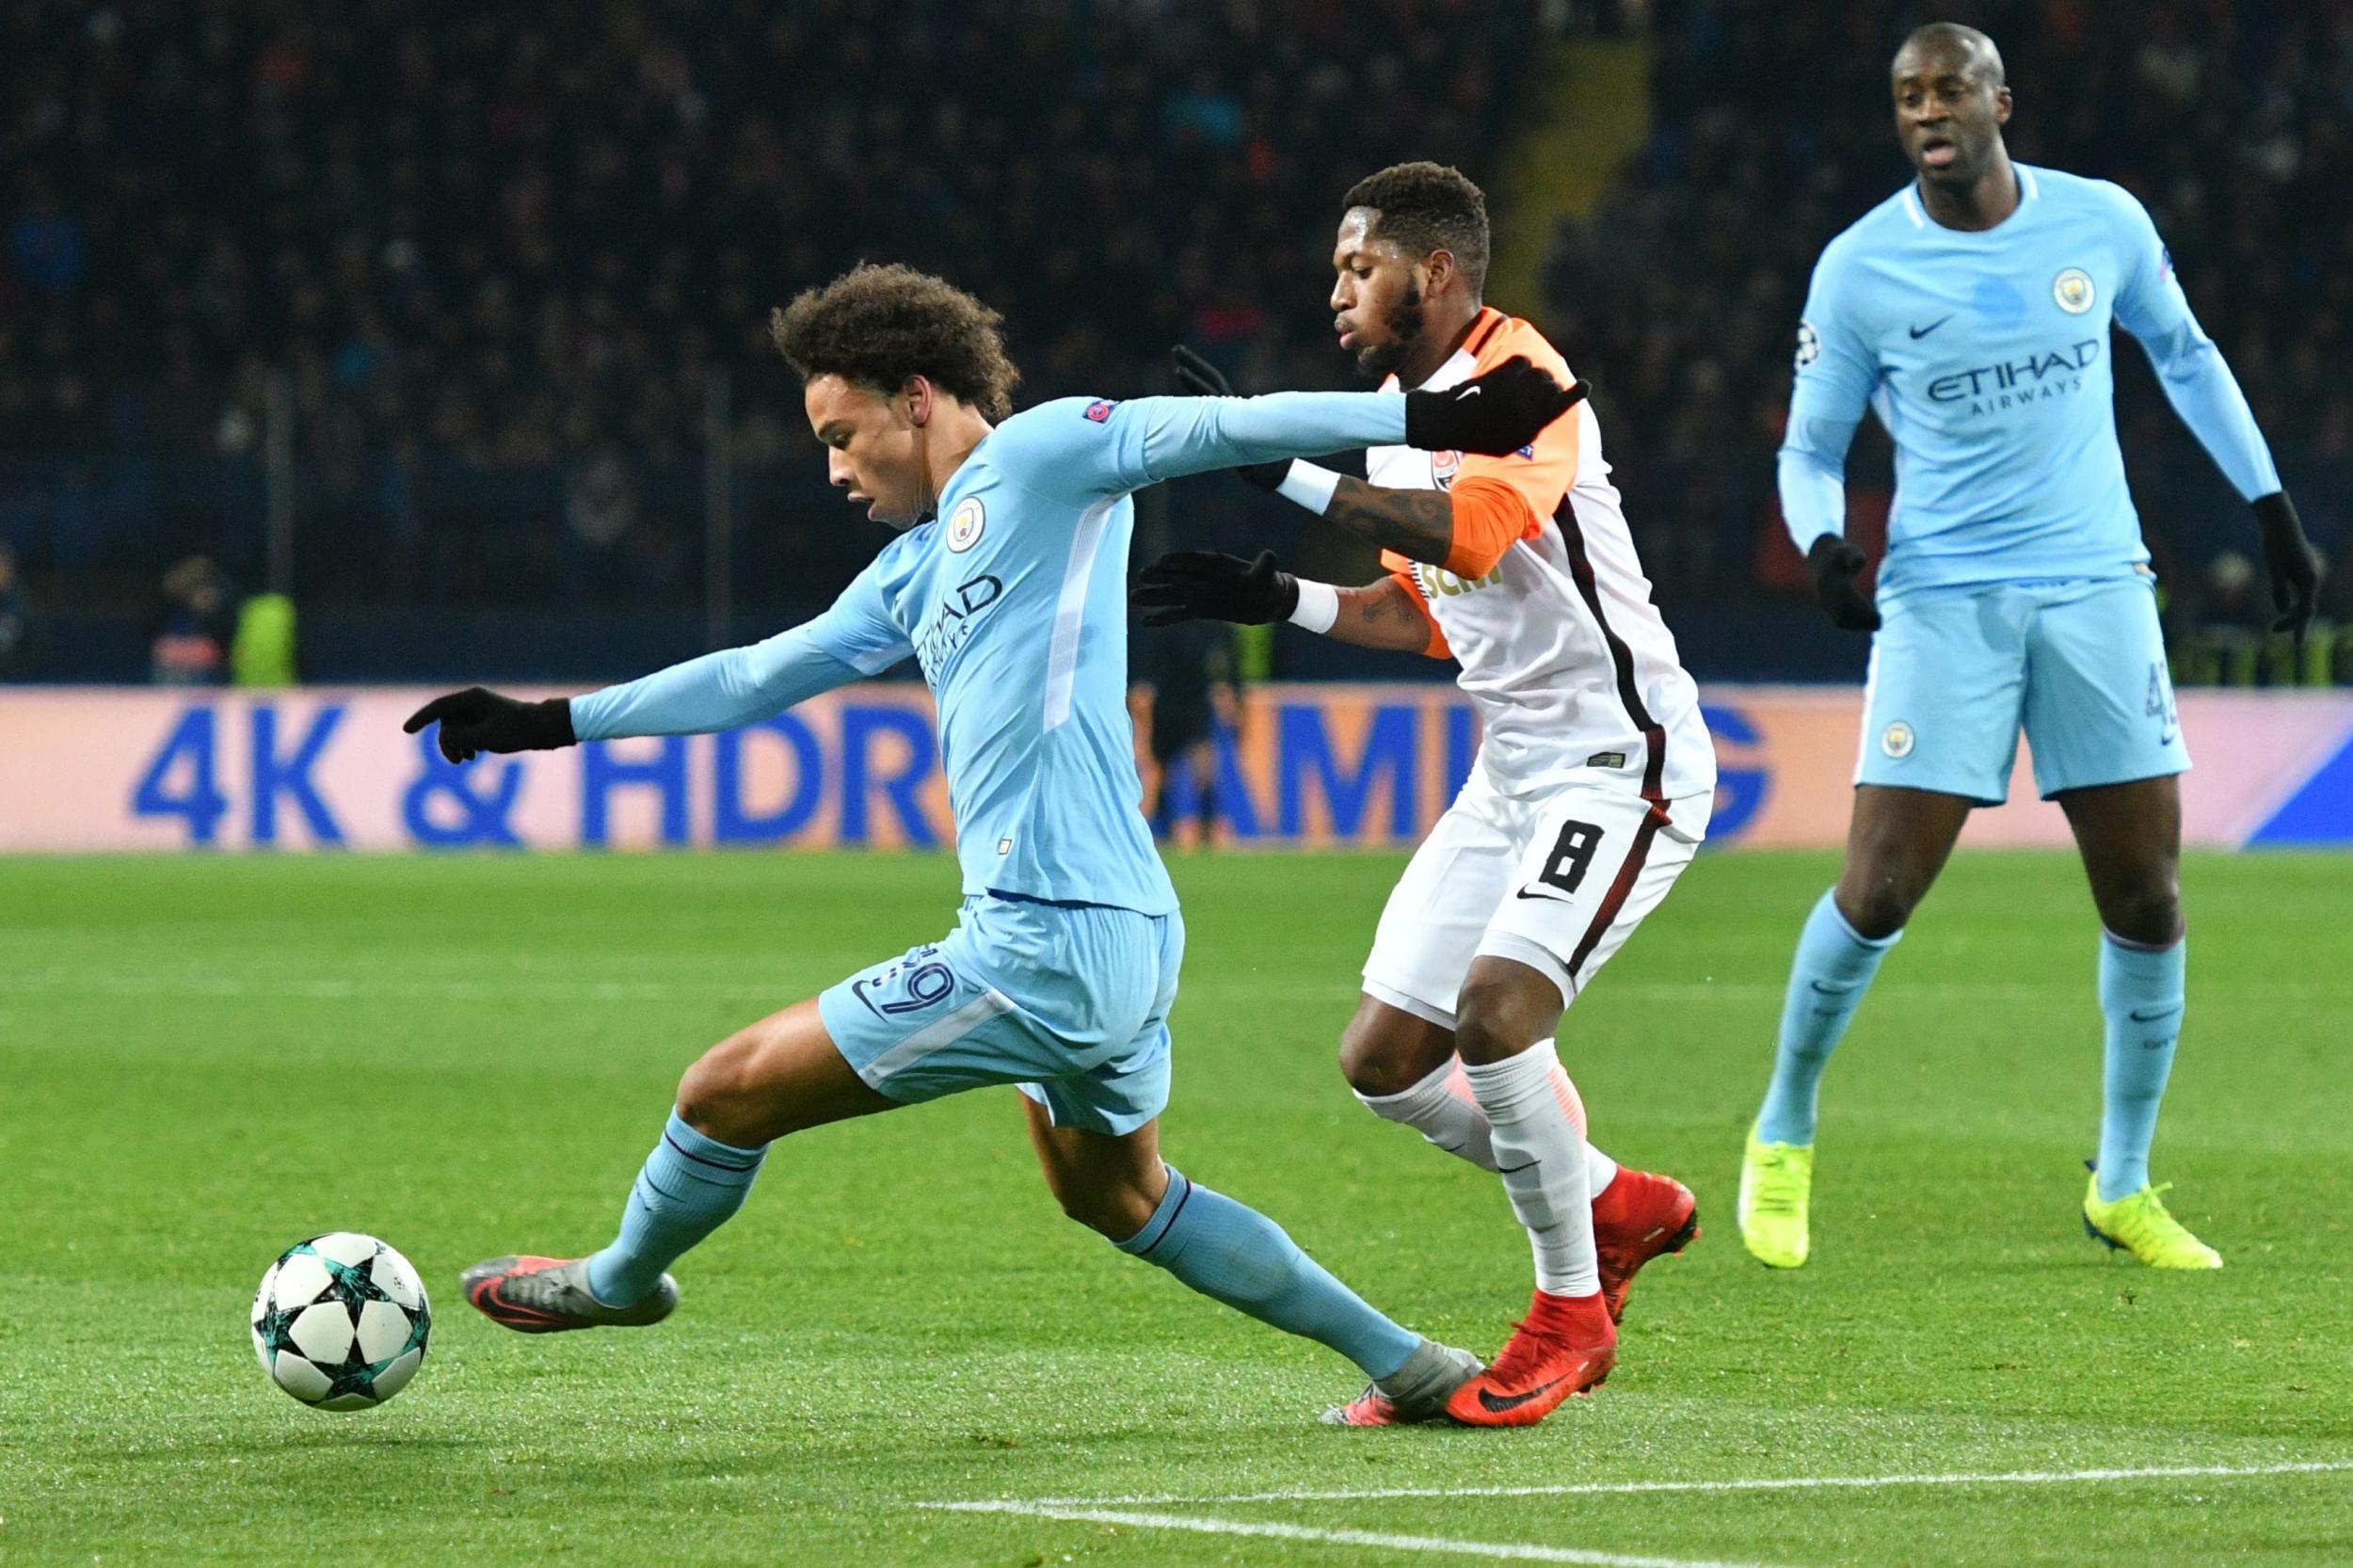 Manchester City won 2-0 in their last encounter with Shakhtar Donetsk